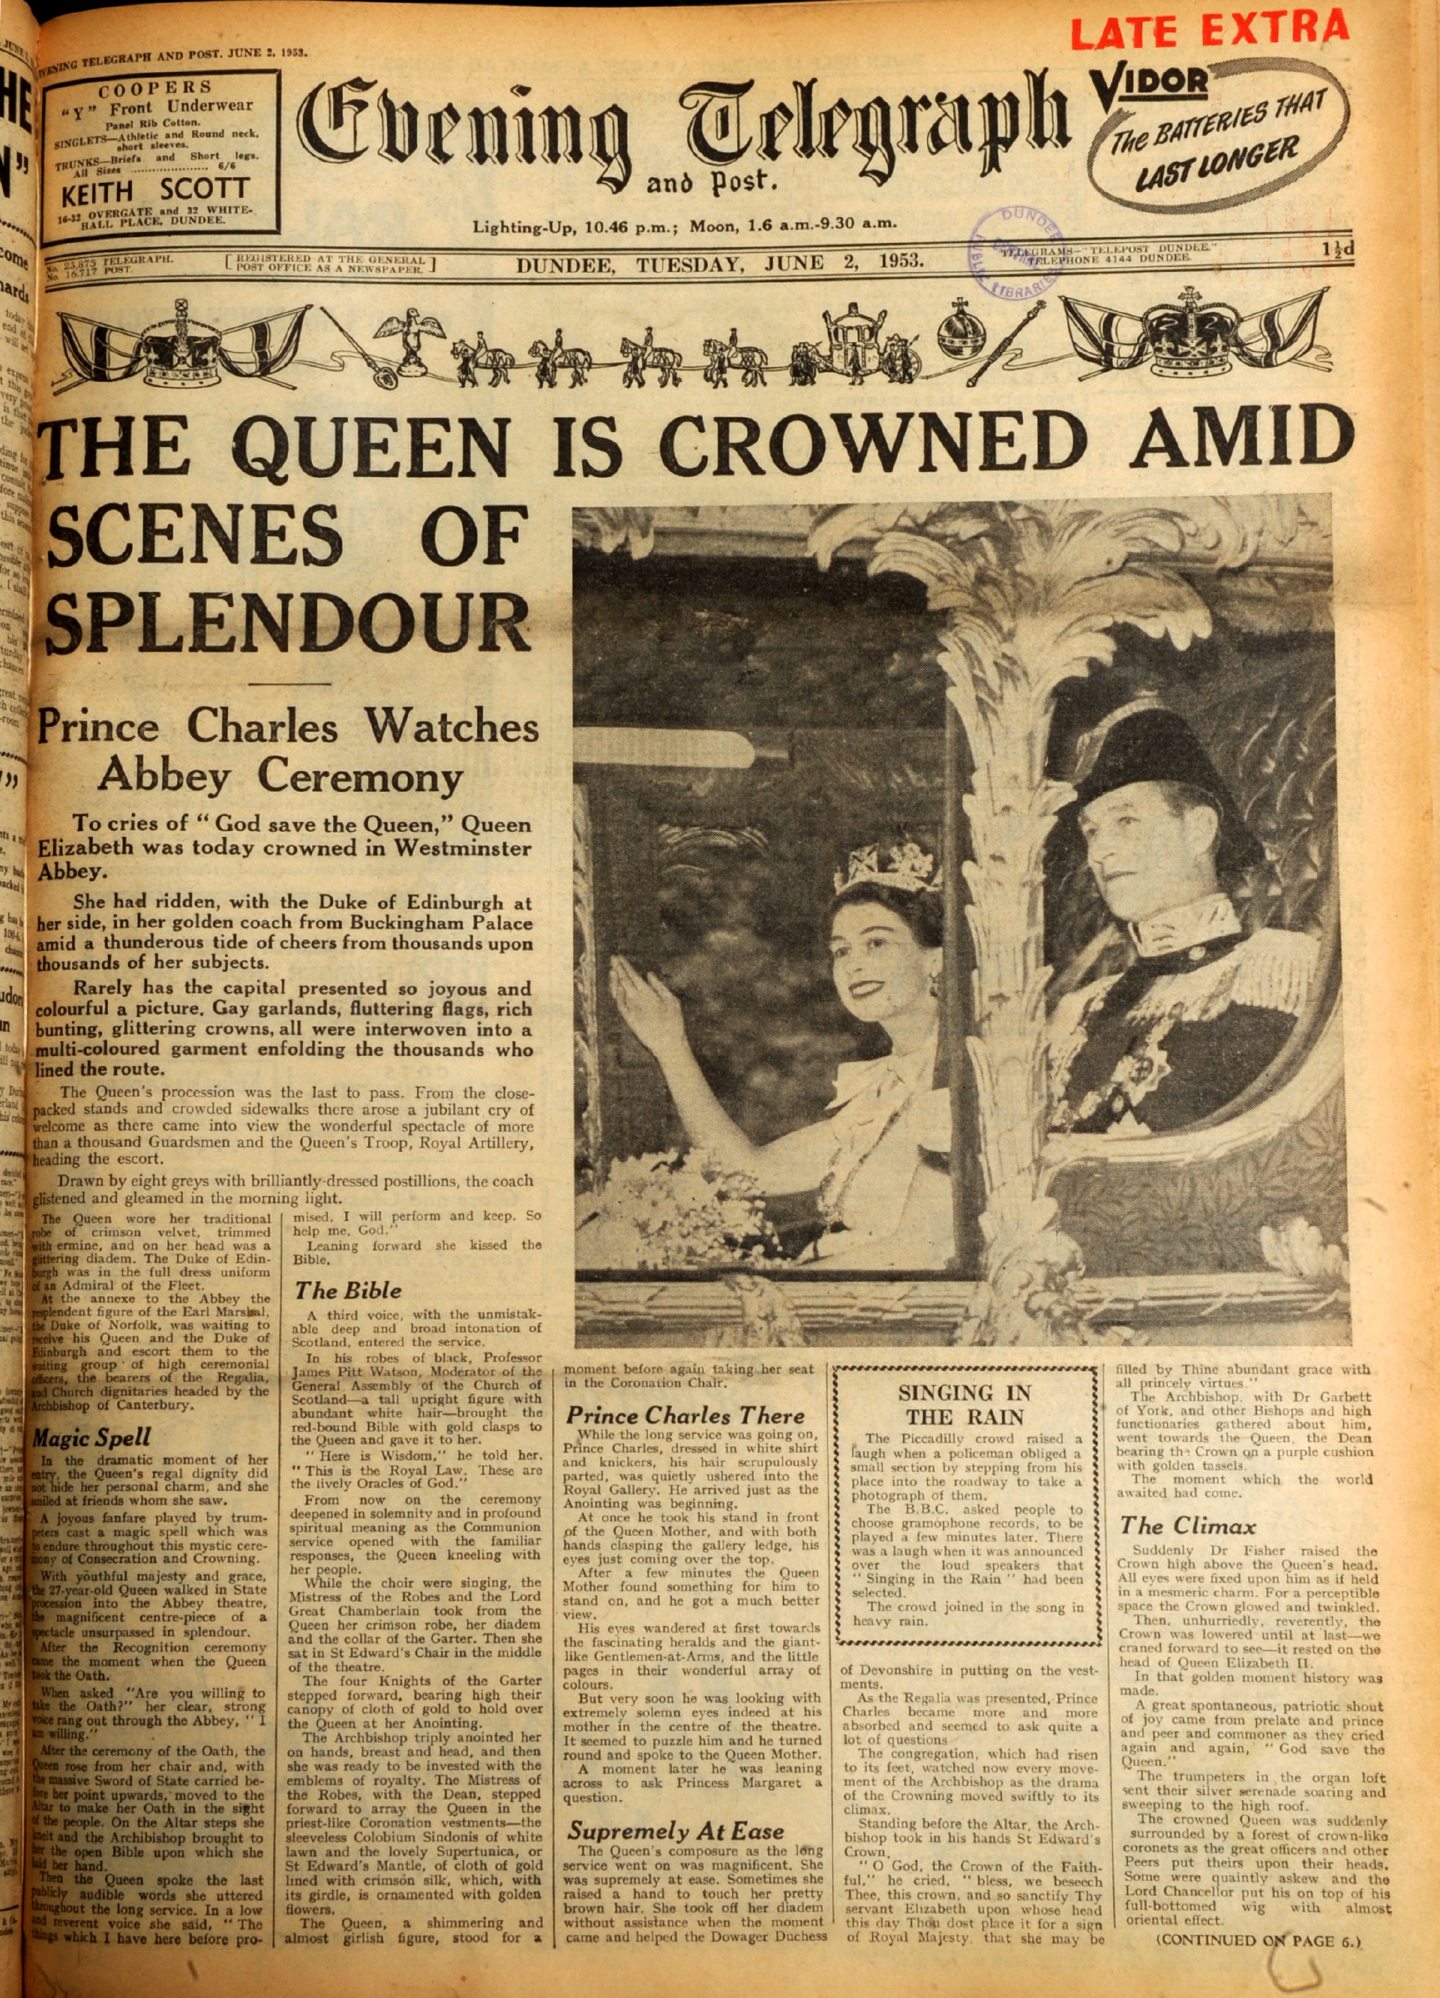 Here's how the Evening Telegraph reported on the coronation of the Queen. Image: DC Thomson.